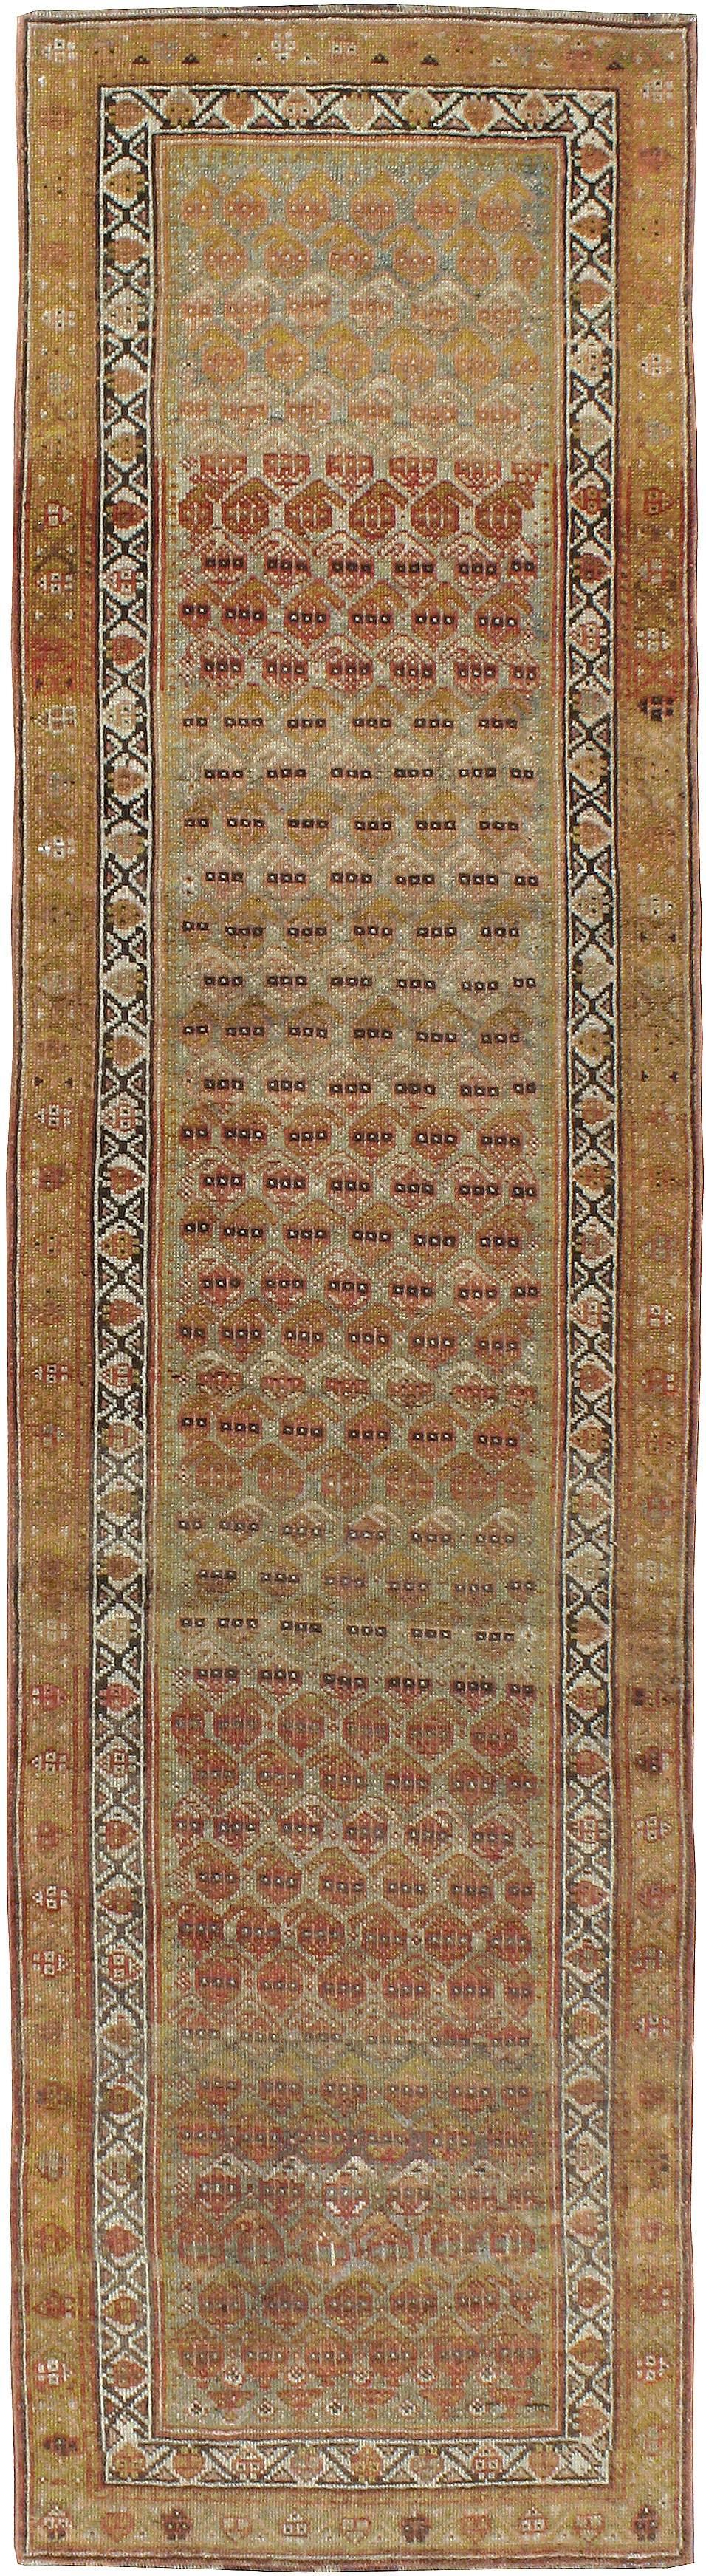 An antique Persian Malayer rug from the first quarter of the 20th century. Malayer is one of over 100 weaving villages outside of Hamadan in Northwestern Iran. The patterns of Malayer rugs are primarily geometric and one Classic pattern, ‘boteh’